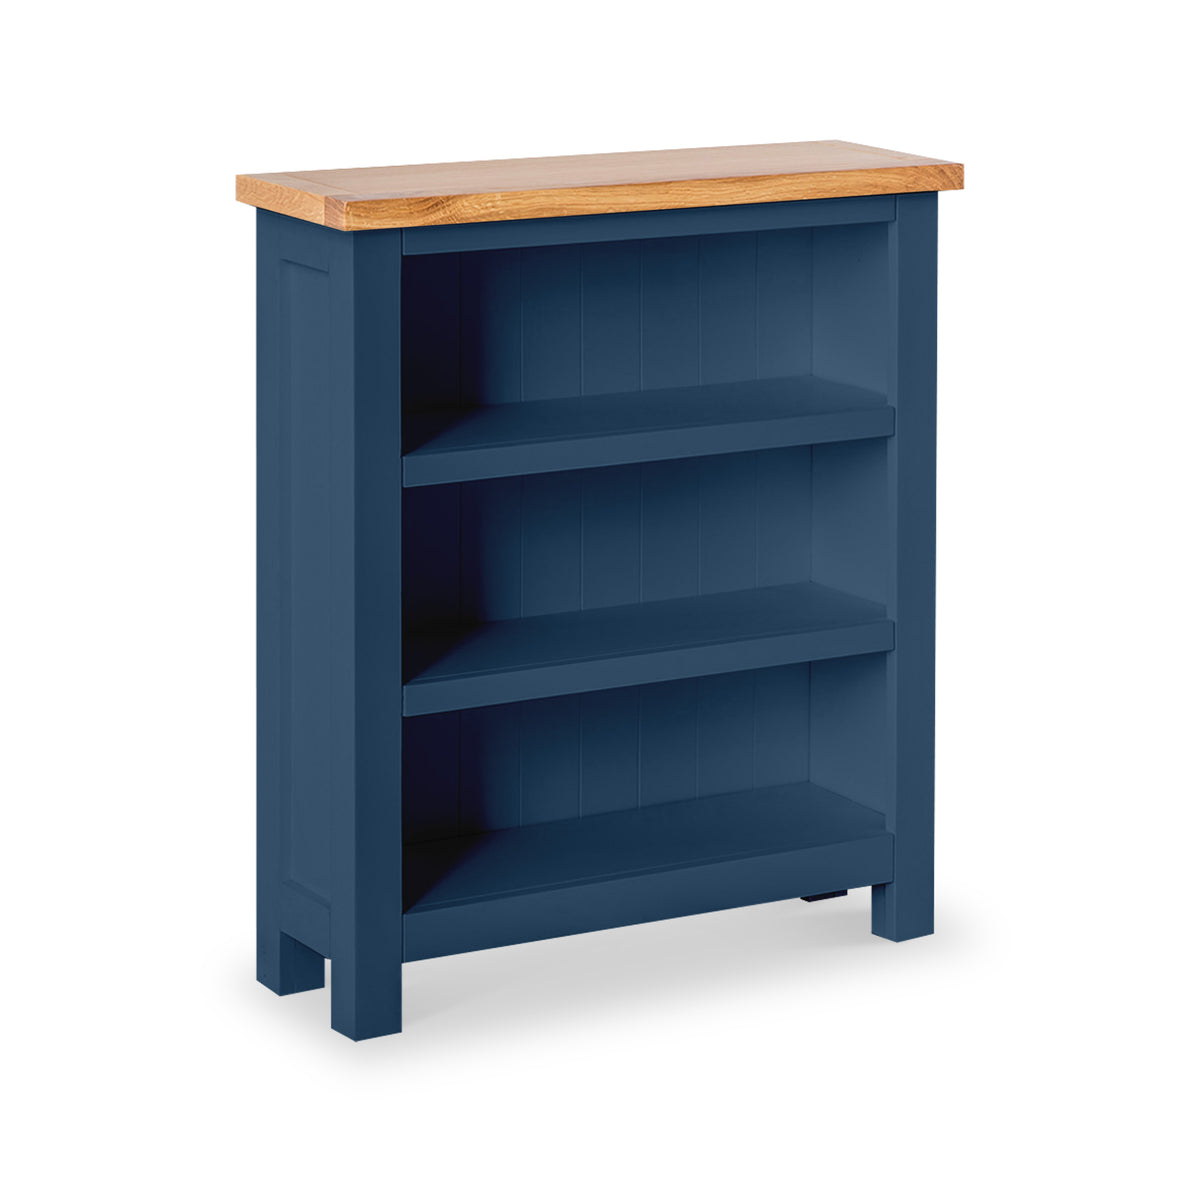 Farrow Navy Blue Low Bookcase from Roseland Furniture